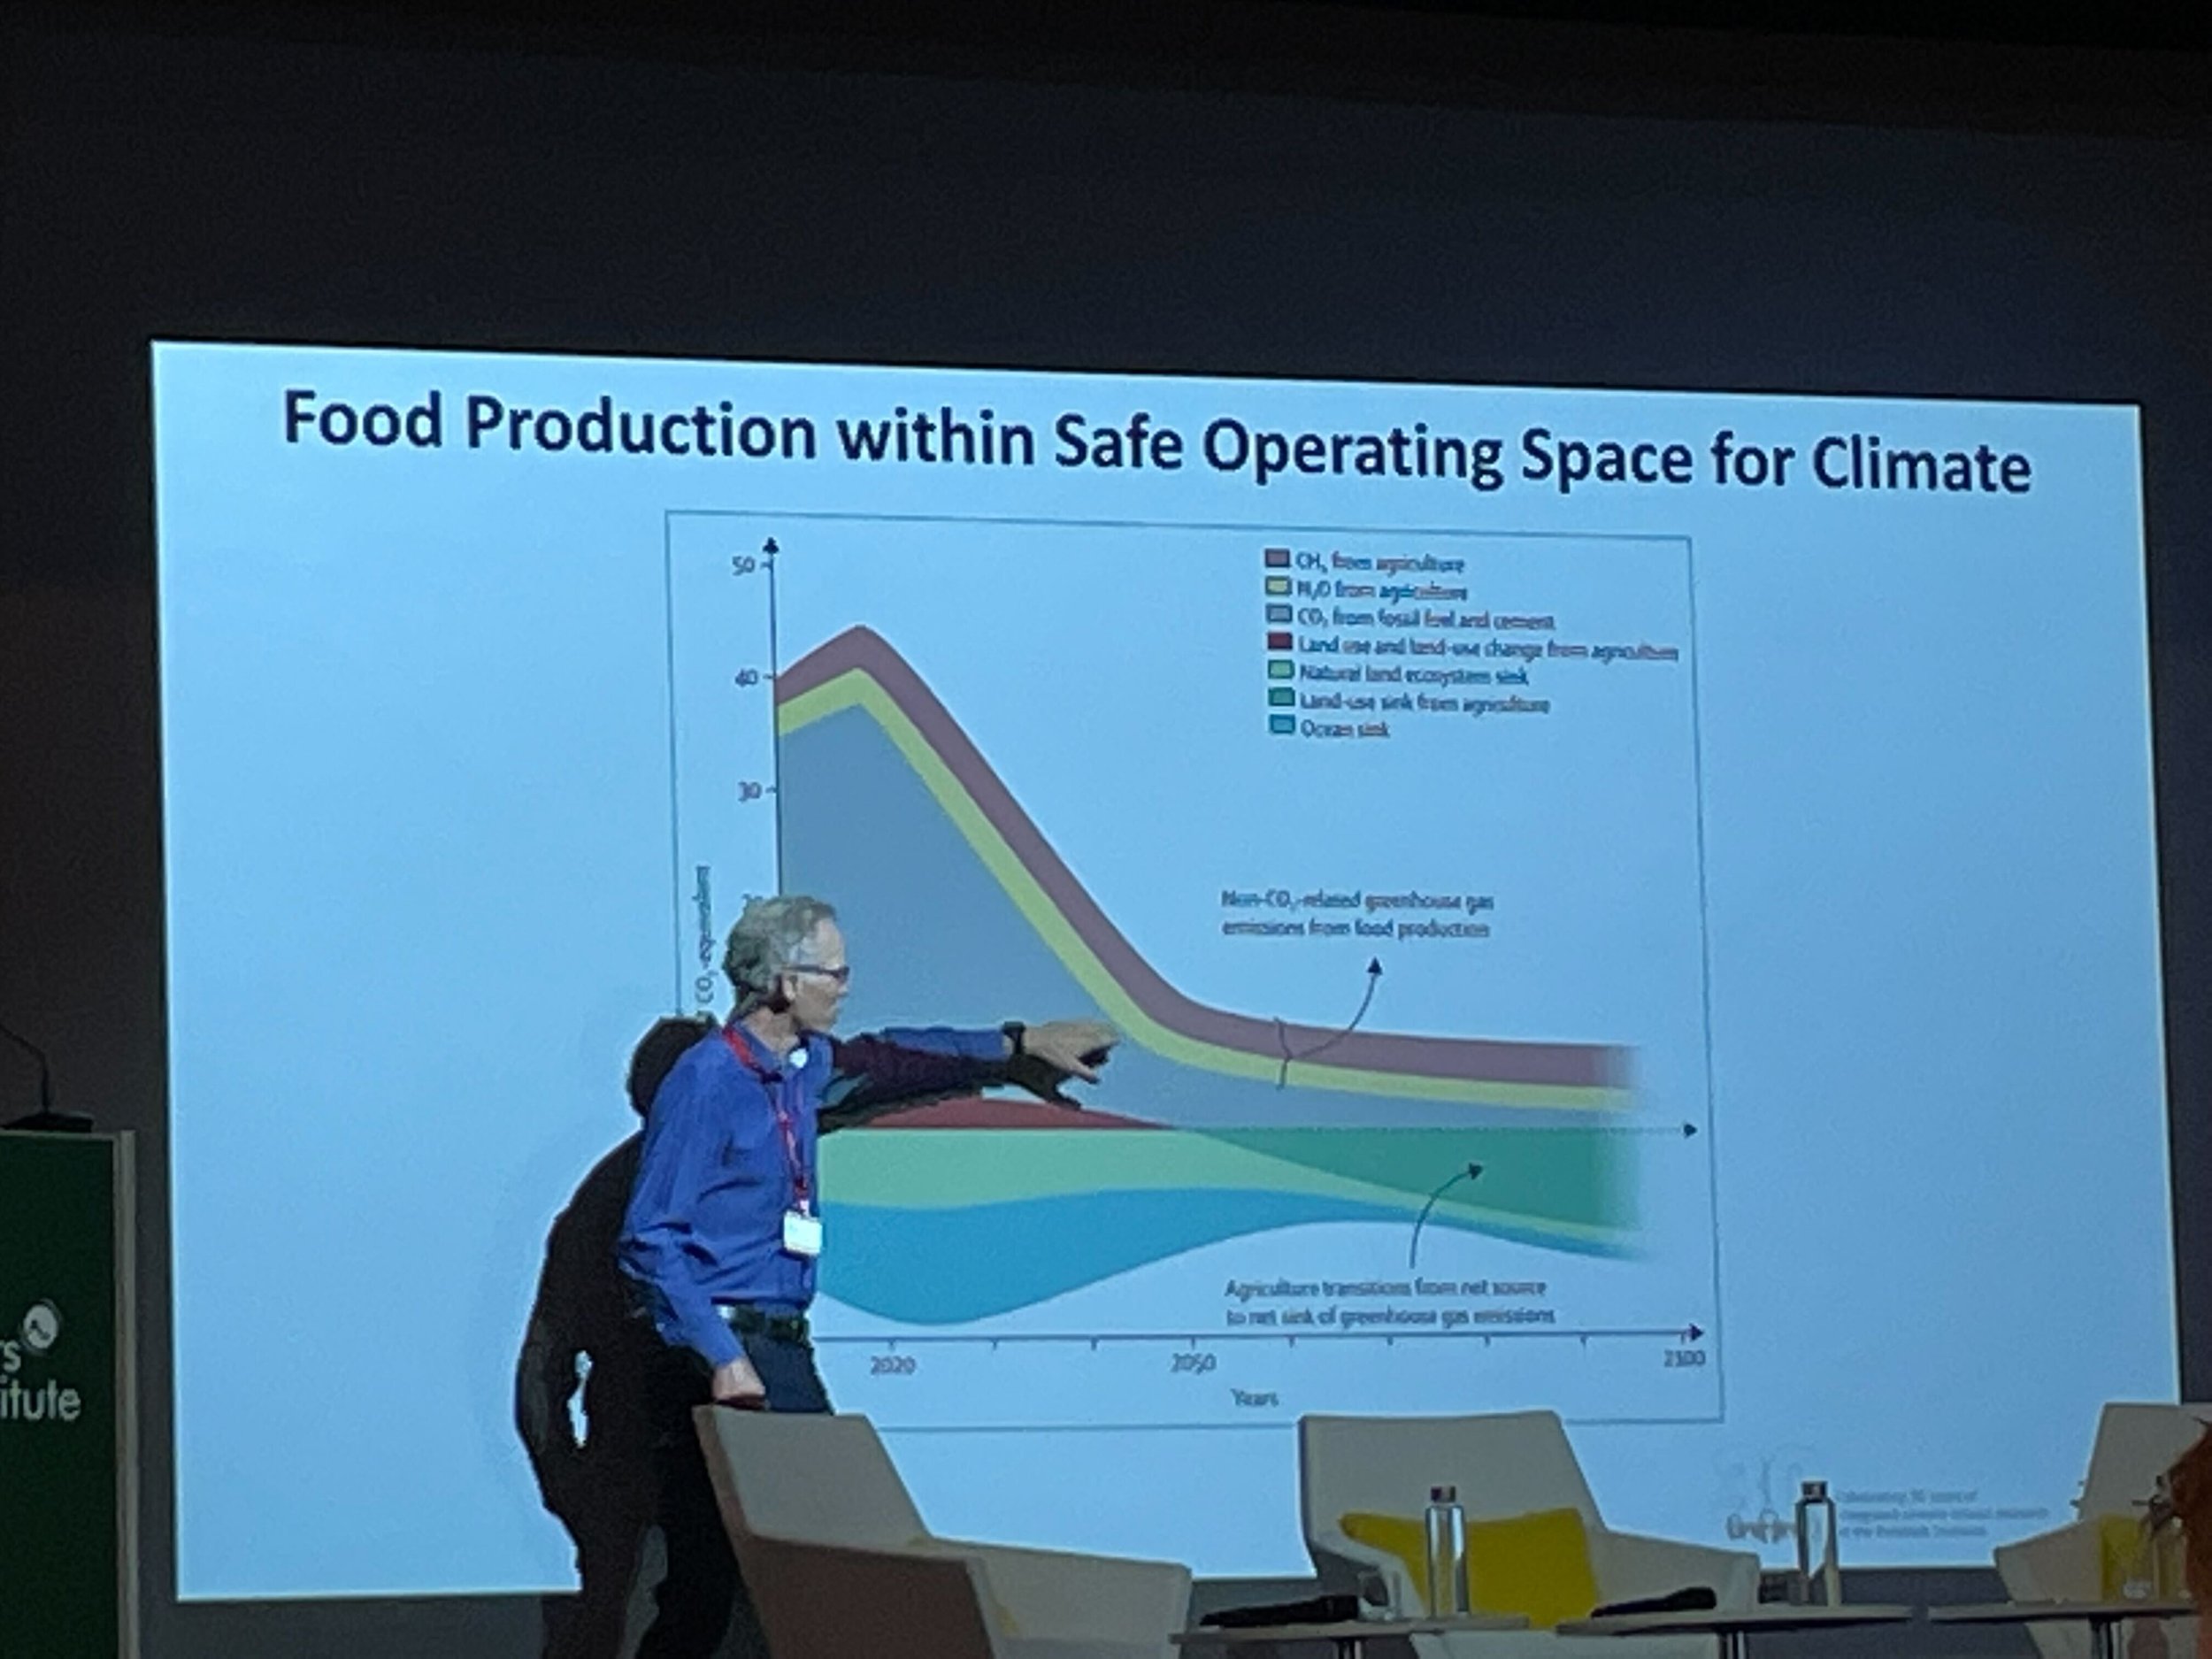 Food Production within Safe Operating Space for Climate